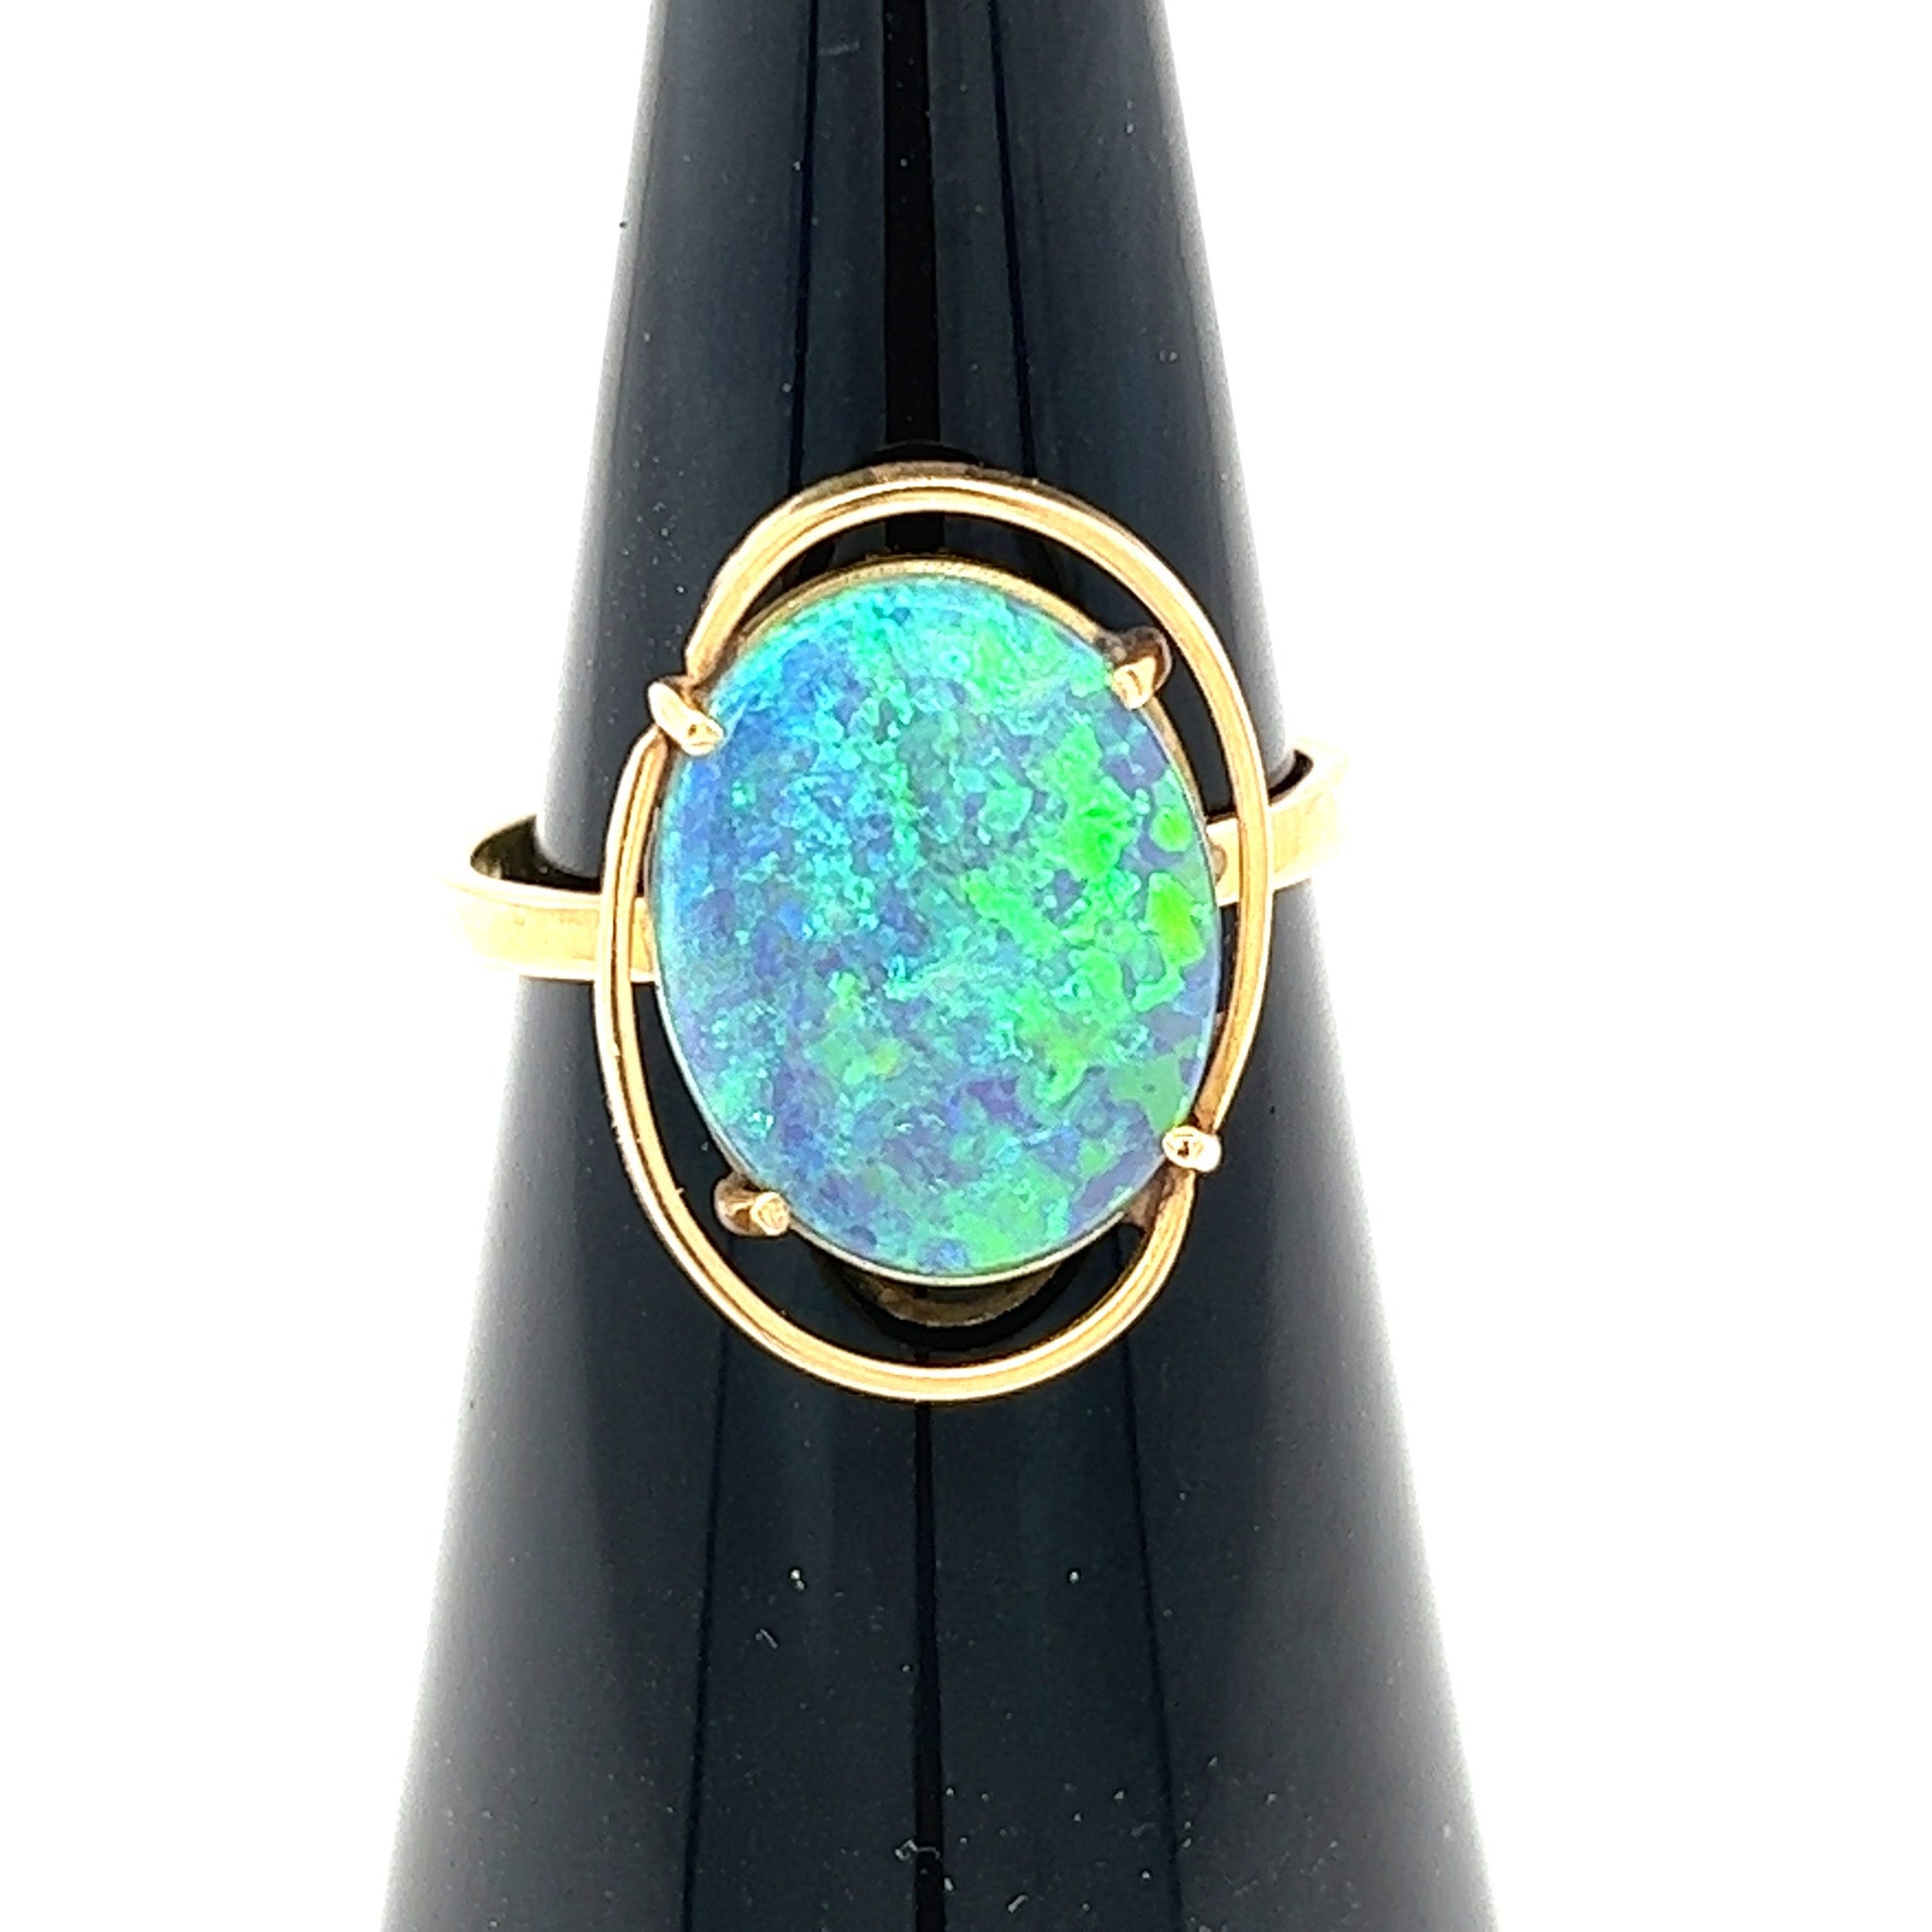 Beautiful 14ct gold Coober Pedy crystal opal ring. Perfect for any occasion.